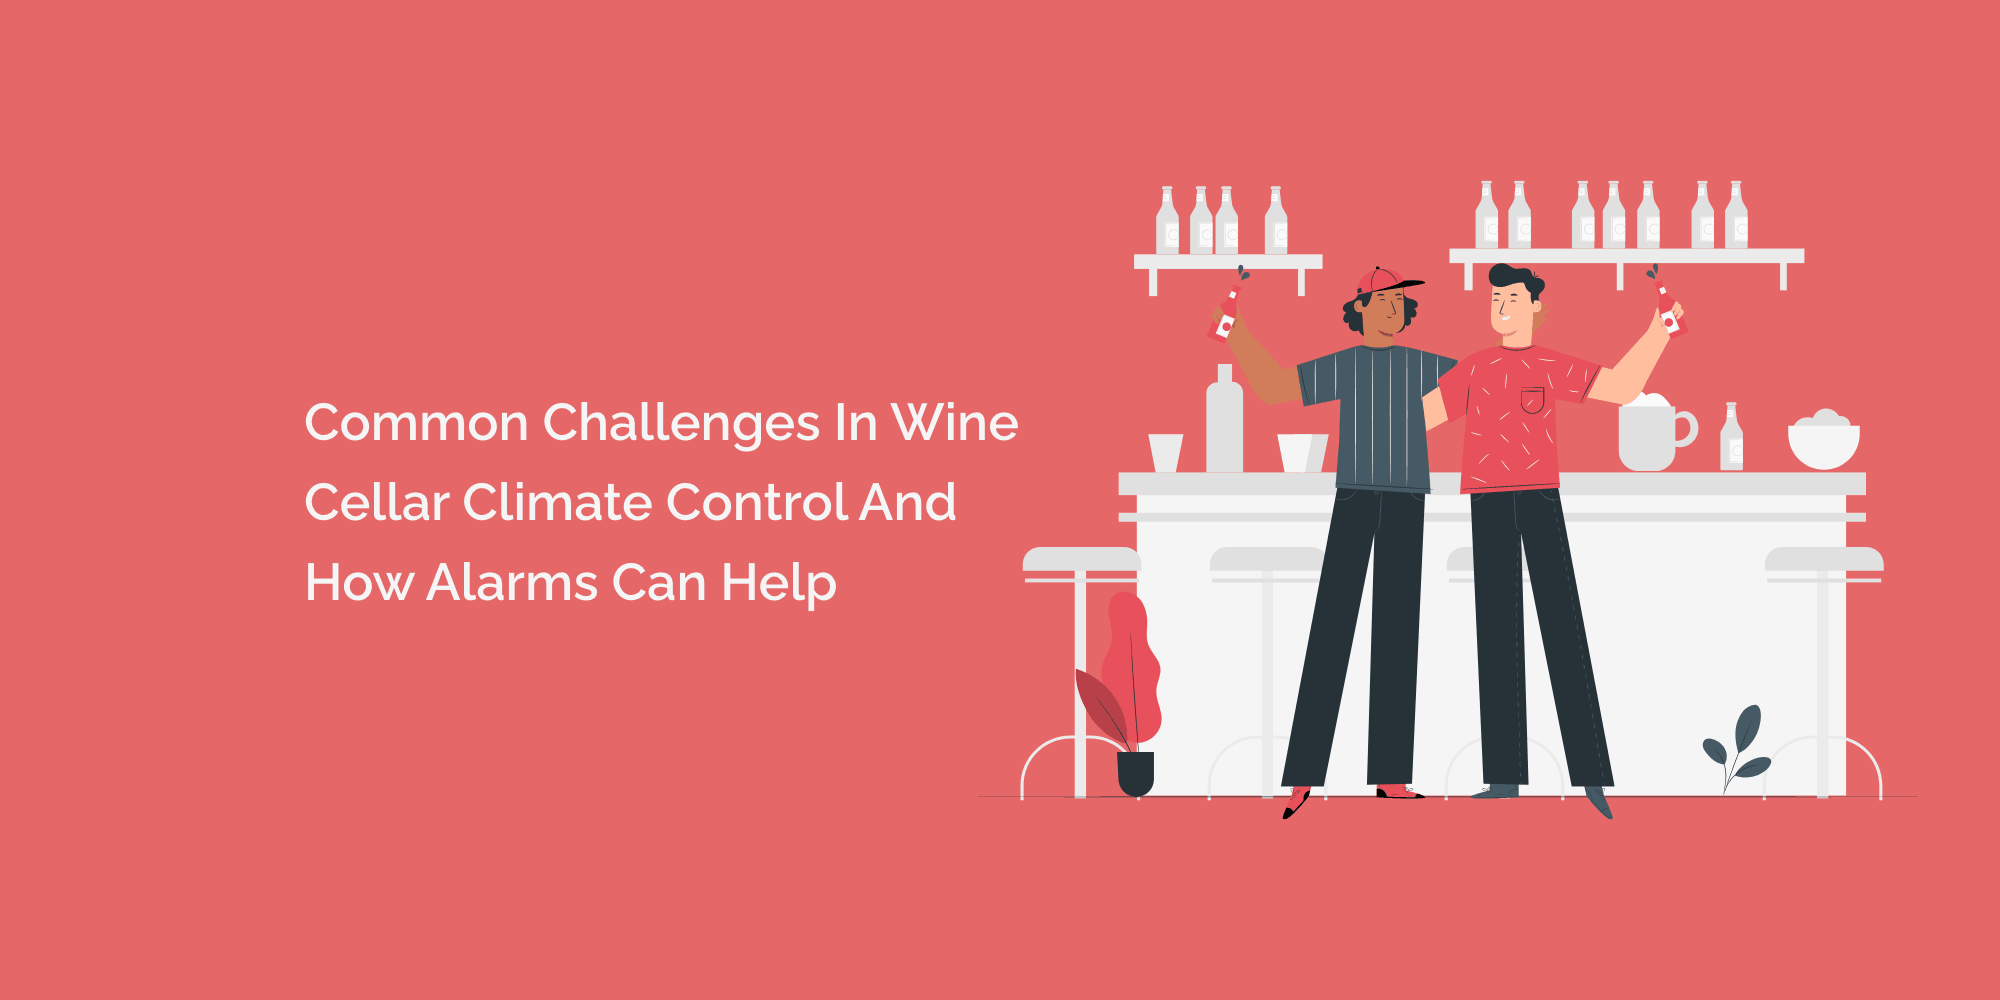 Common Challenges in Wine Cellar Climate Control and How Alarms Can Help